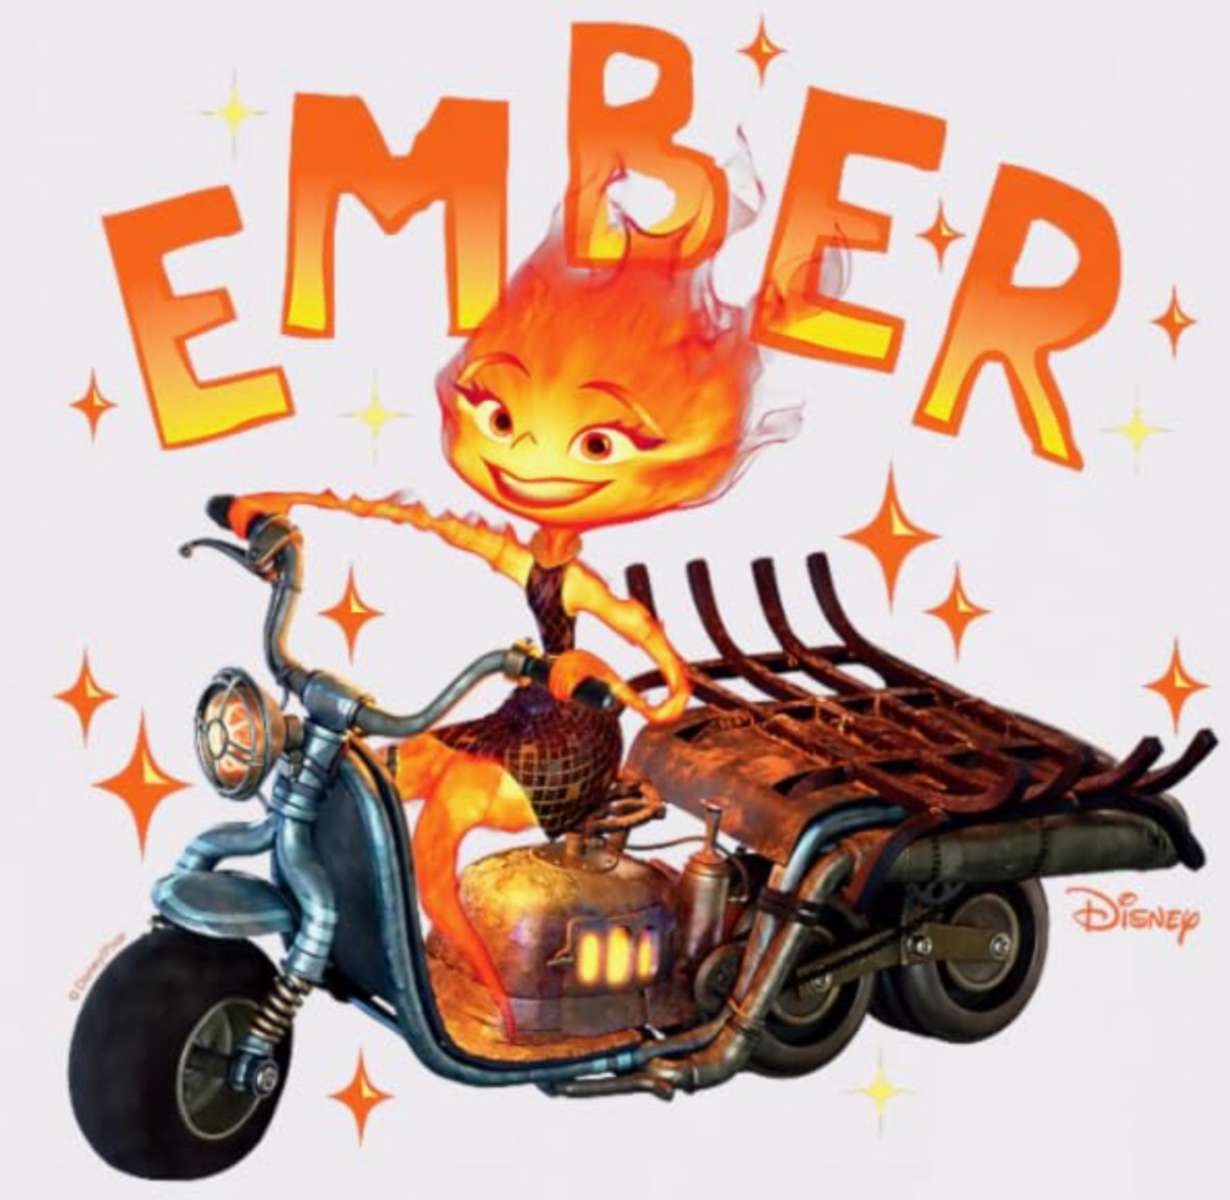 Elemental - Ember Scooter❤️❤️❤️❤️ jigsaw puzzle online